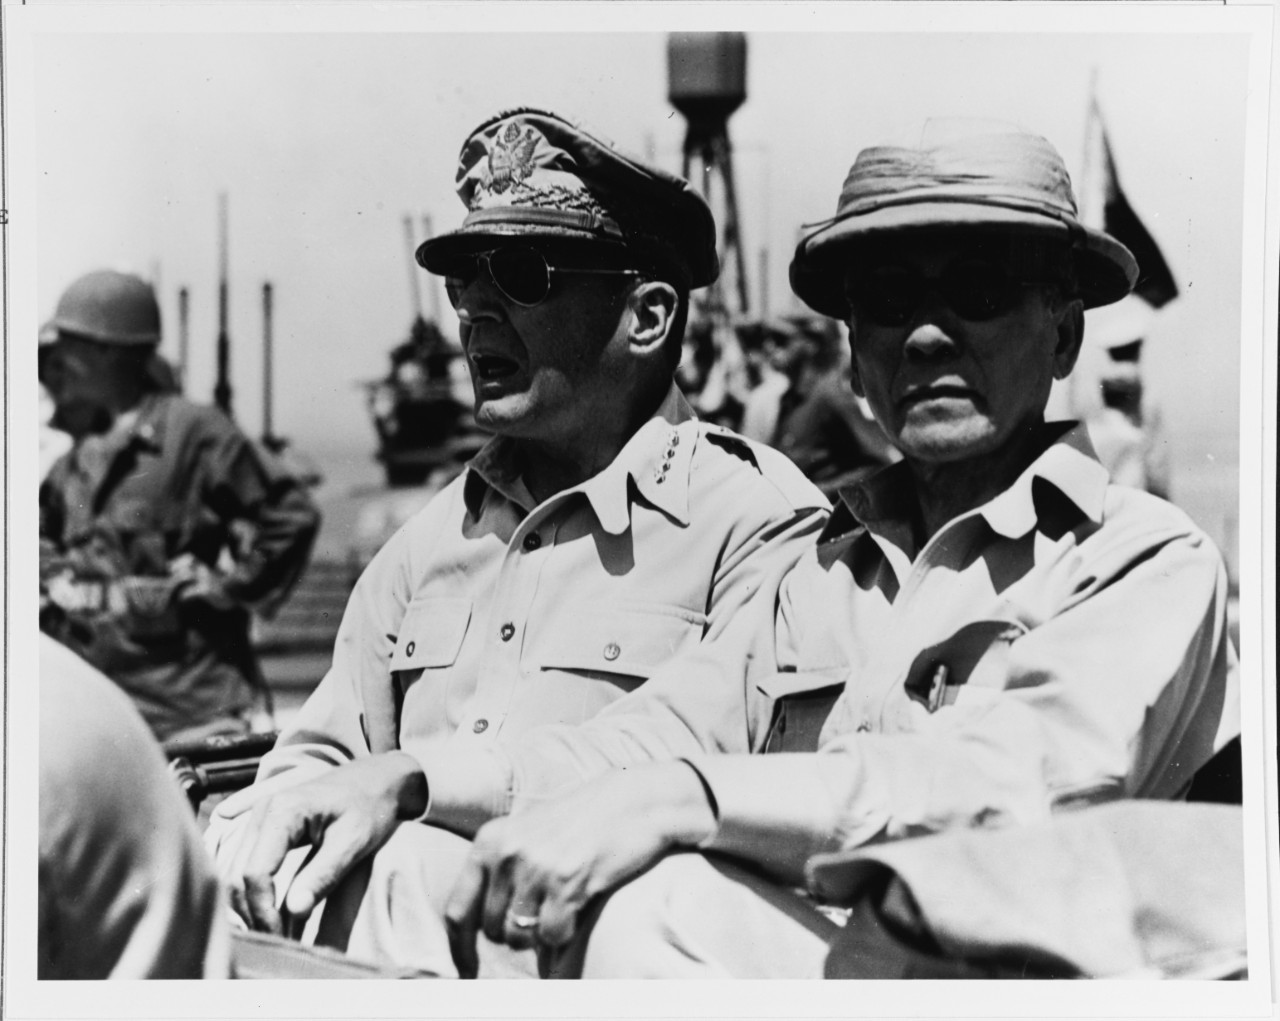 Photo #: 80-G-258303  Sergio Osmeña, President of the Philippines (right), and General Douglas MacArthur, Supreme Commander, Allied Forces, Southwest Pacific Area